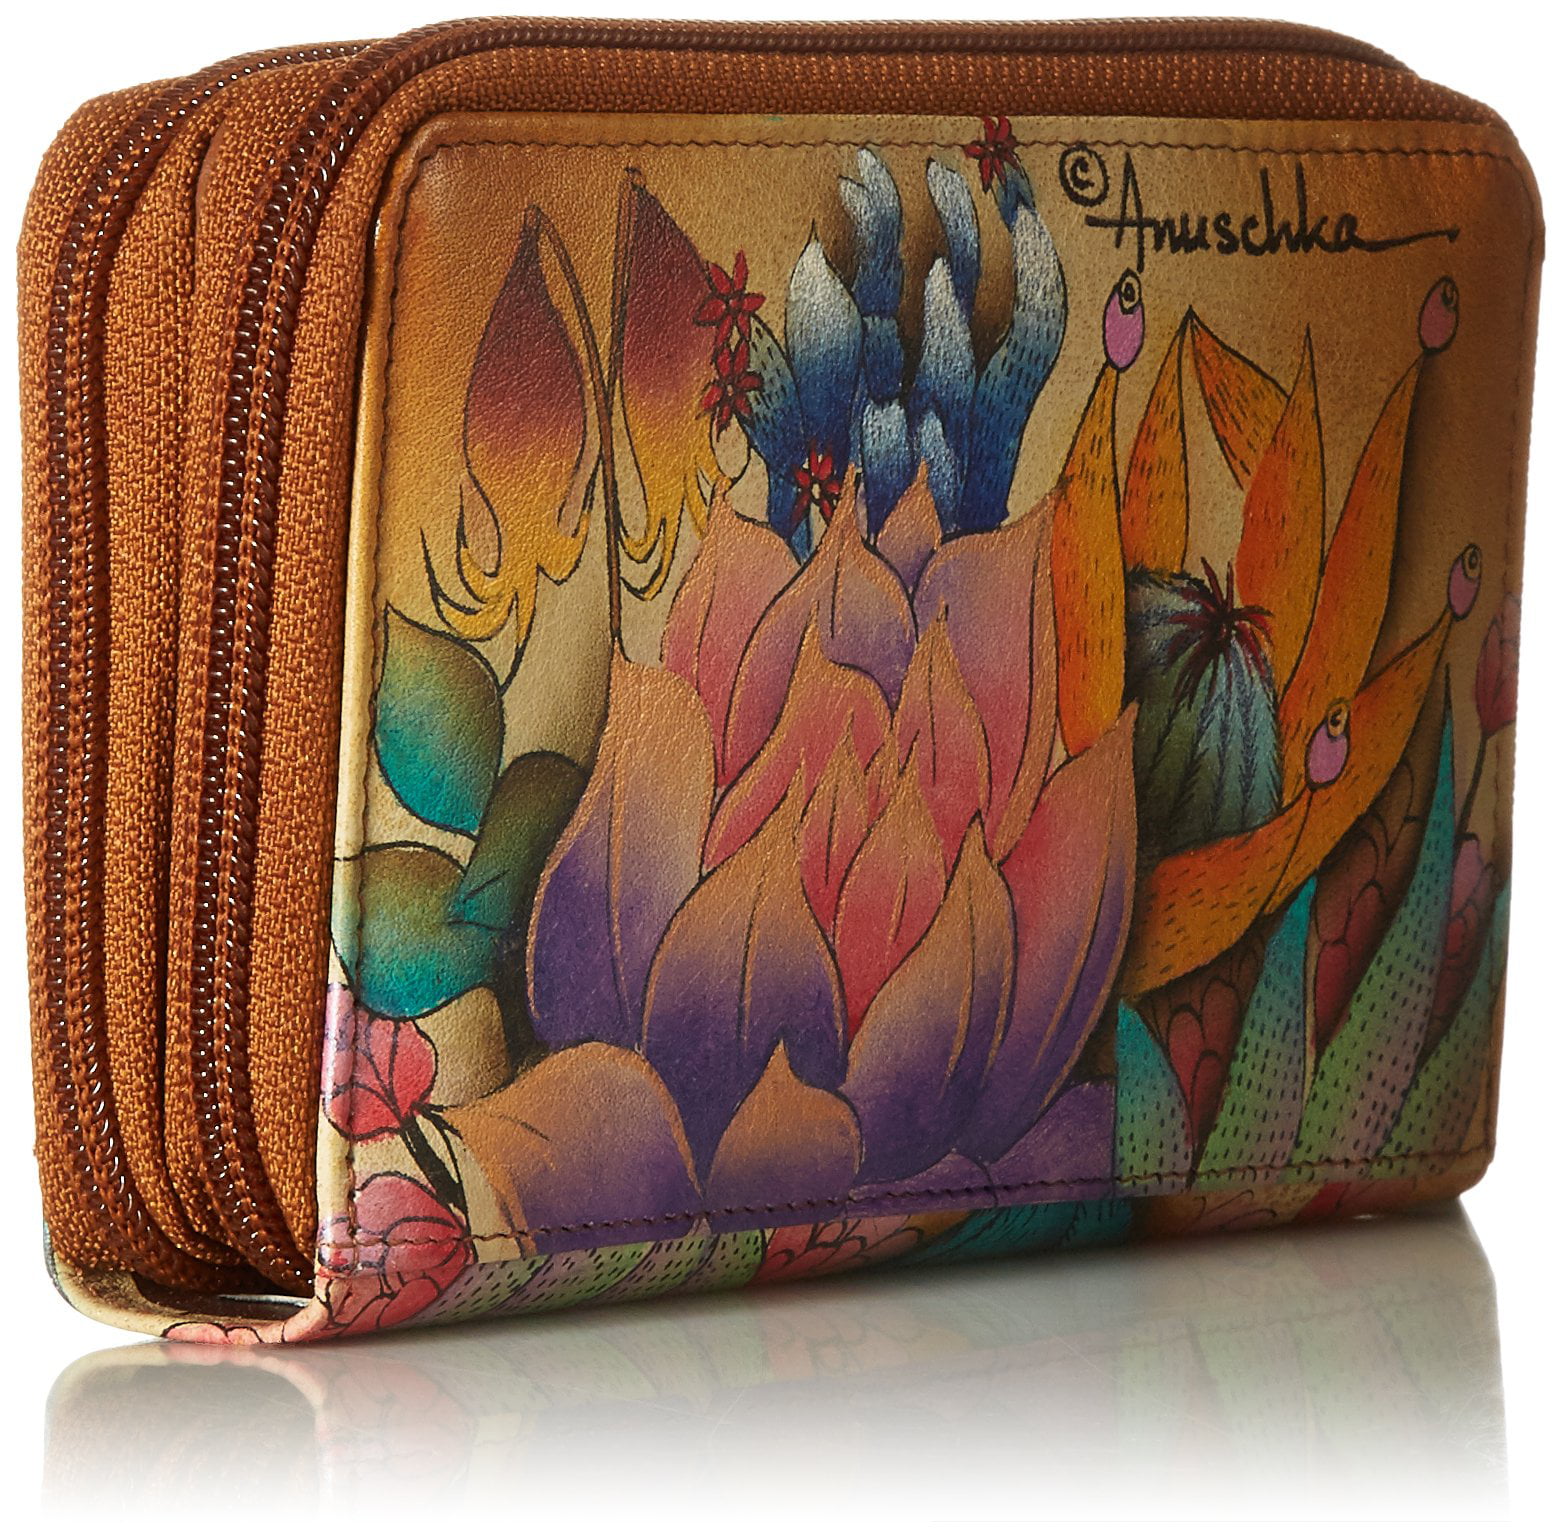 Anuschka Women’s Genuine Leather Twin Zip Organizer Wallet Hand Painted Original Artwork Holds up to 18 Cards 